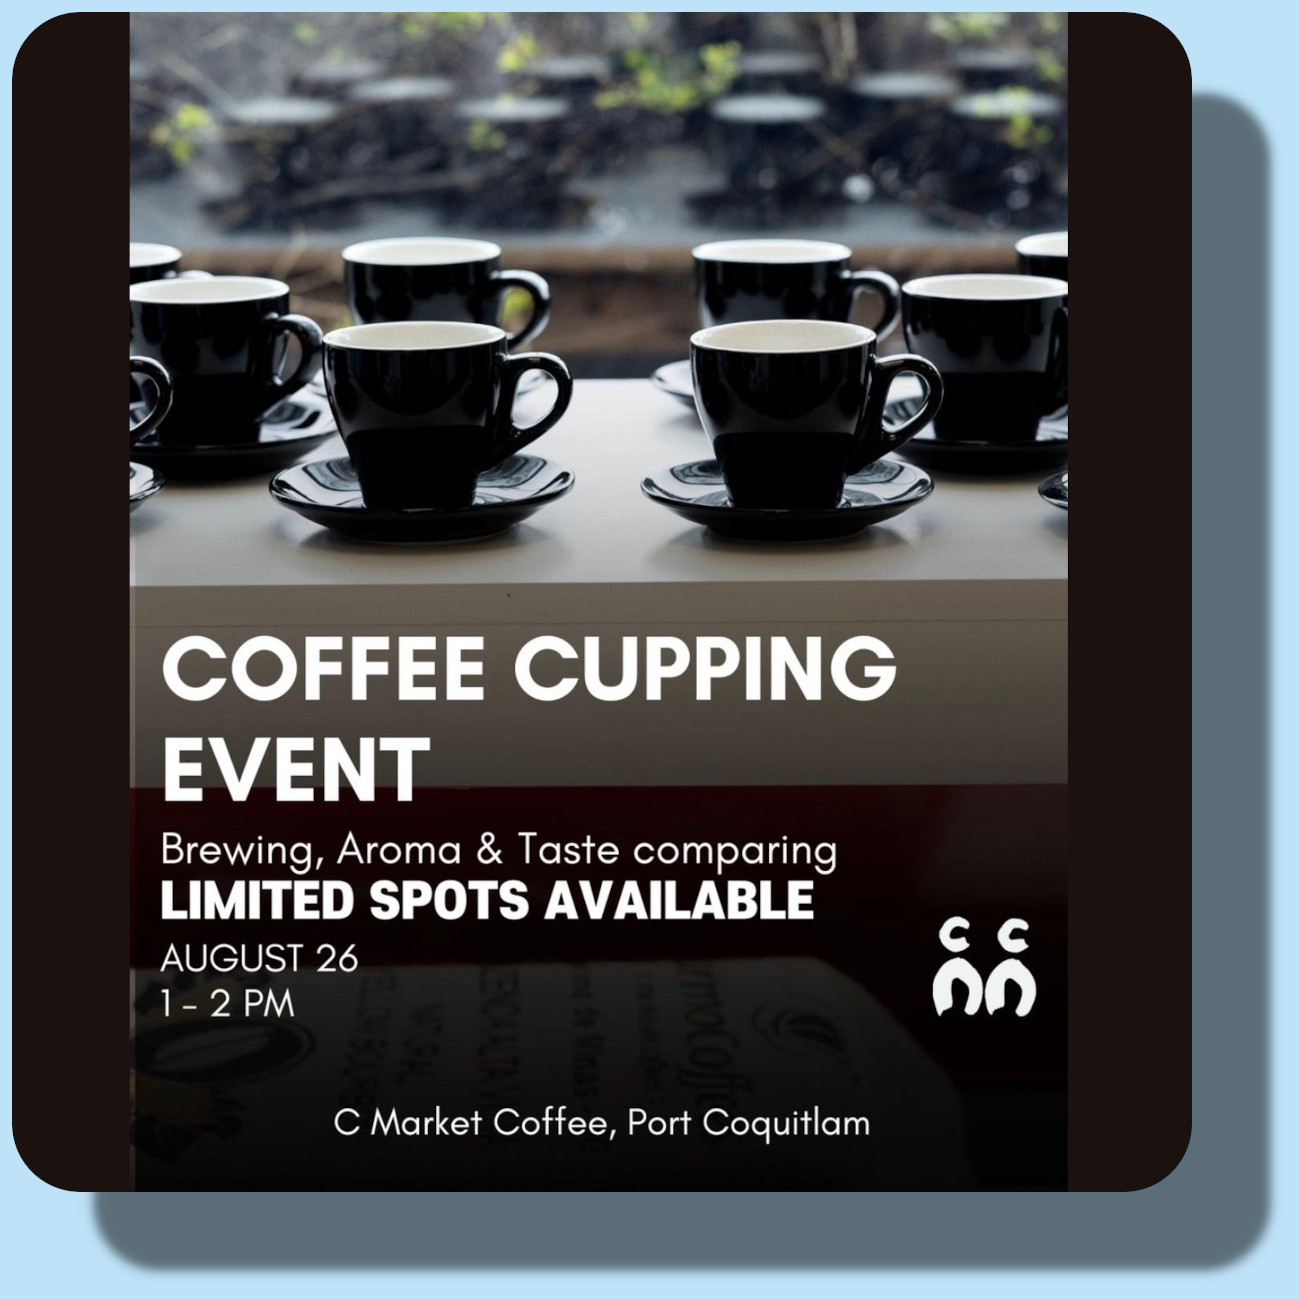 Explore Coffee Tasting: Free Coffee Cupping Event on August 26th